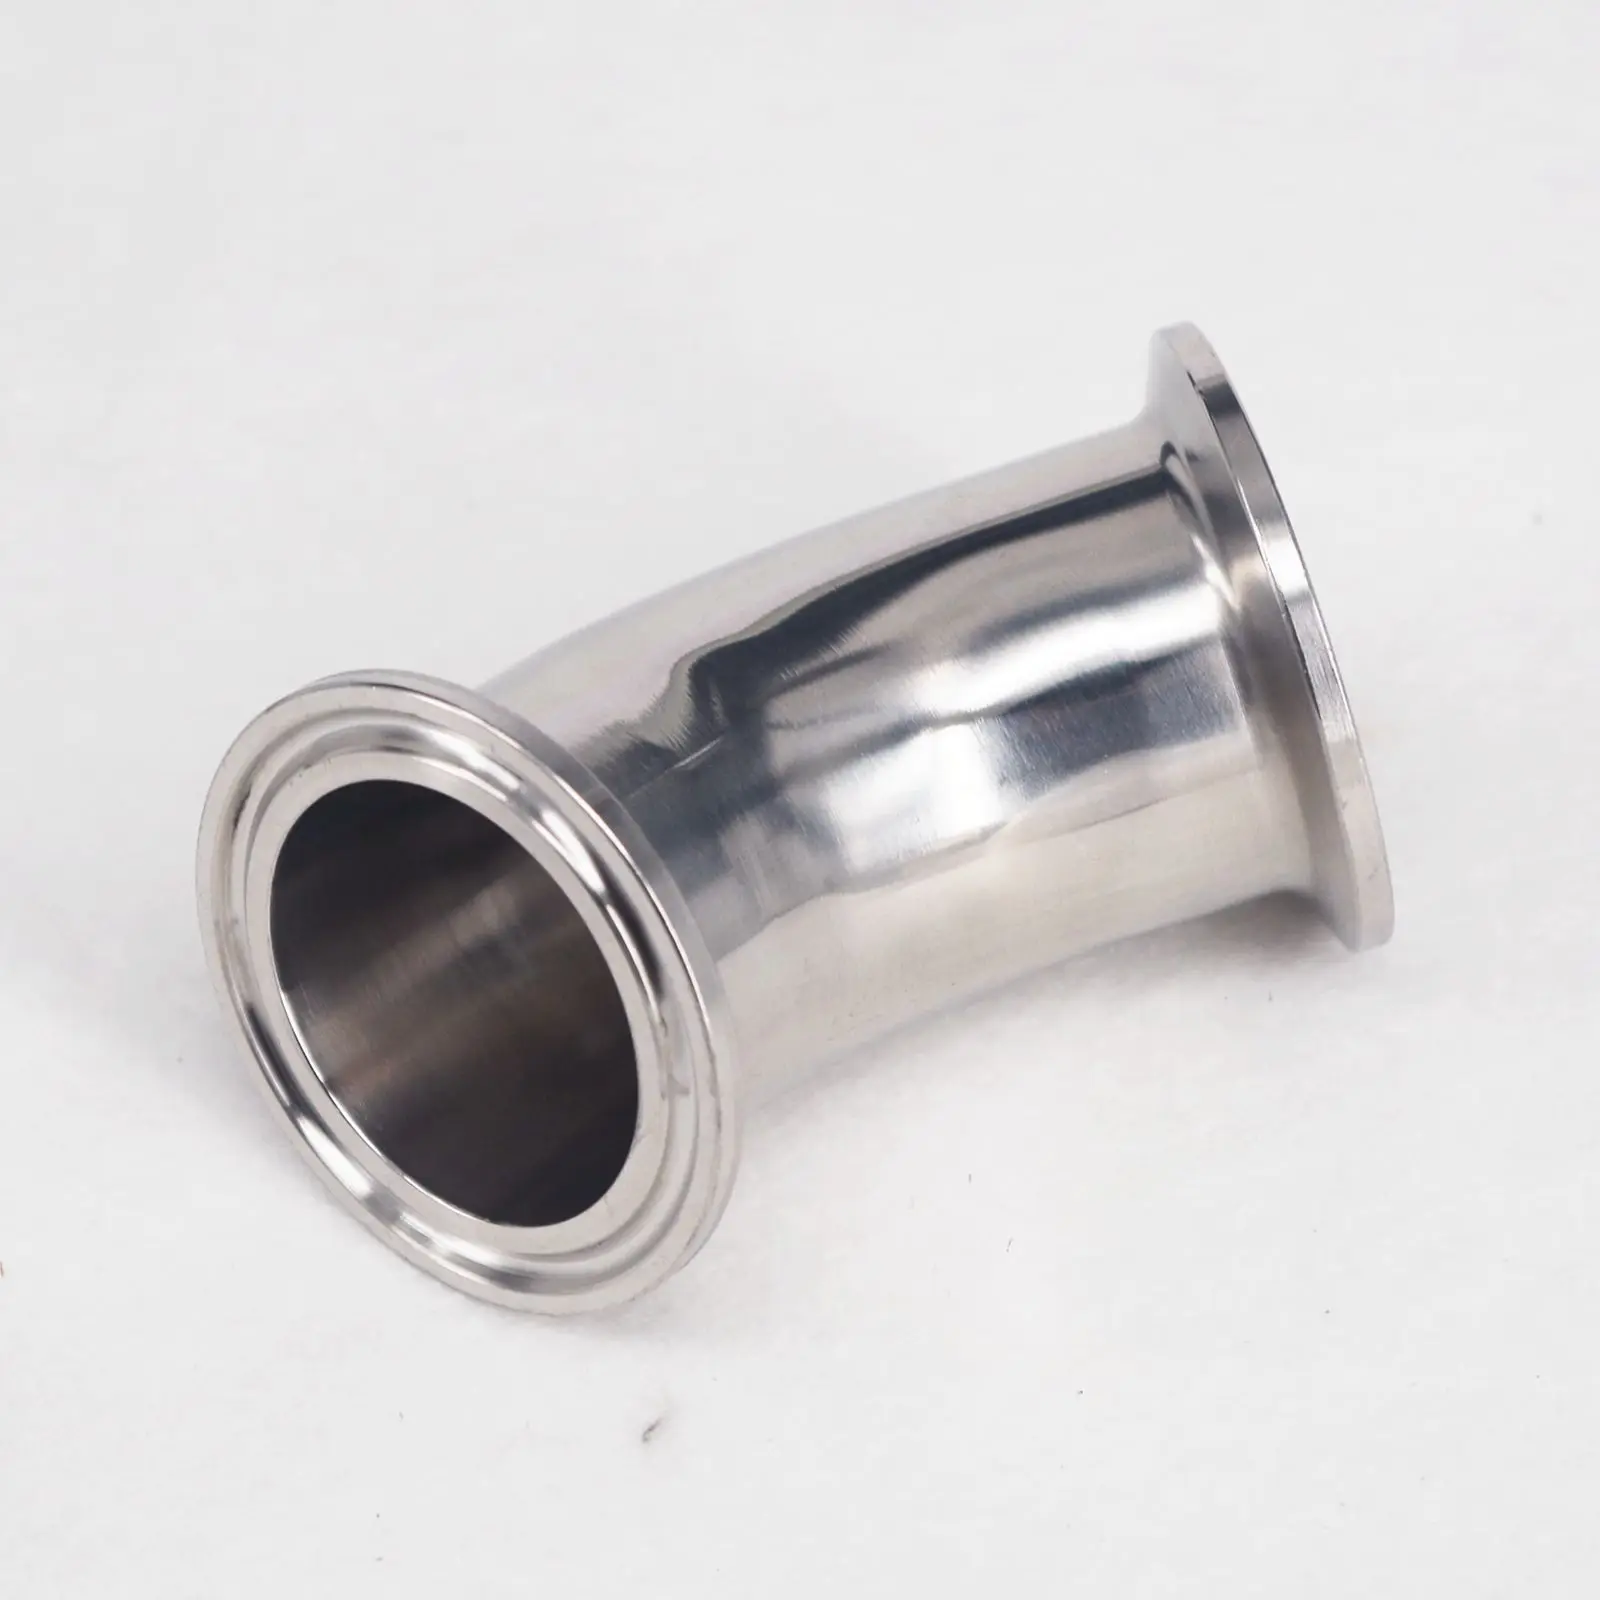 38MM OD 1-1/2" Sanitary Ferrule Elbow 90 Degree Pipe Fitting SS316 Tri Clamp NPT 